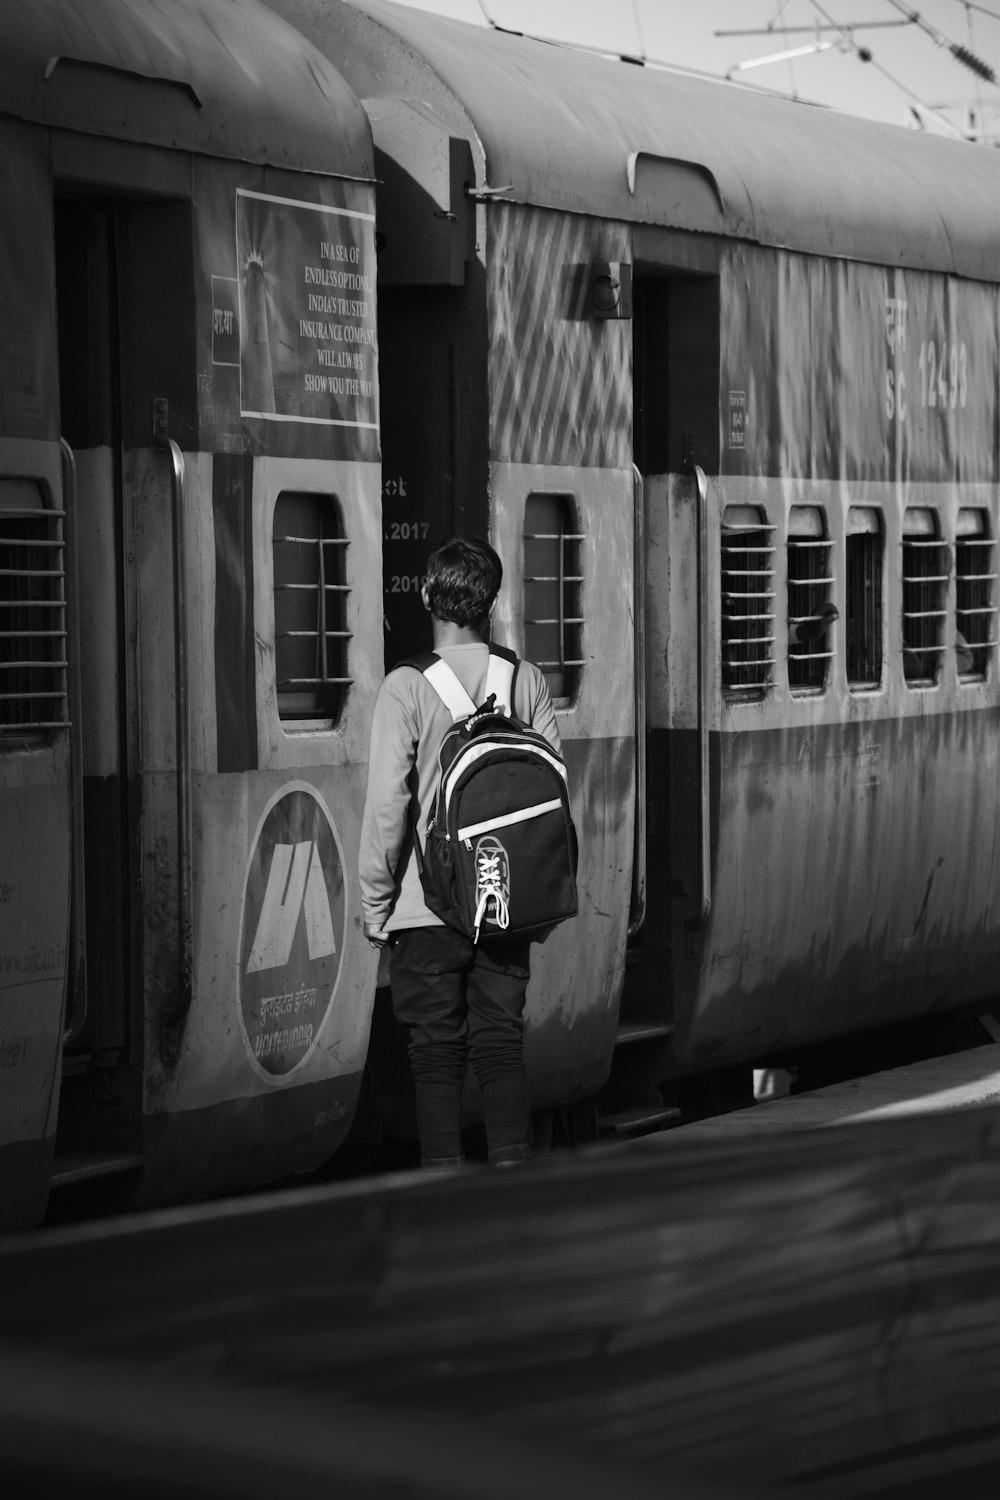 a person with a backpack standing next to a train